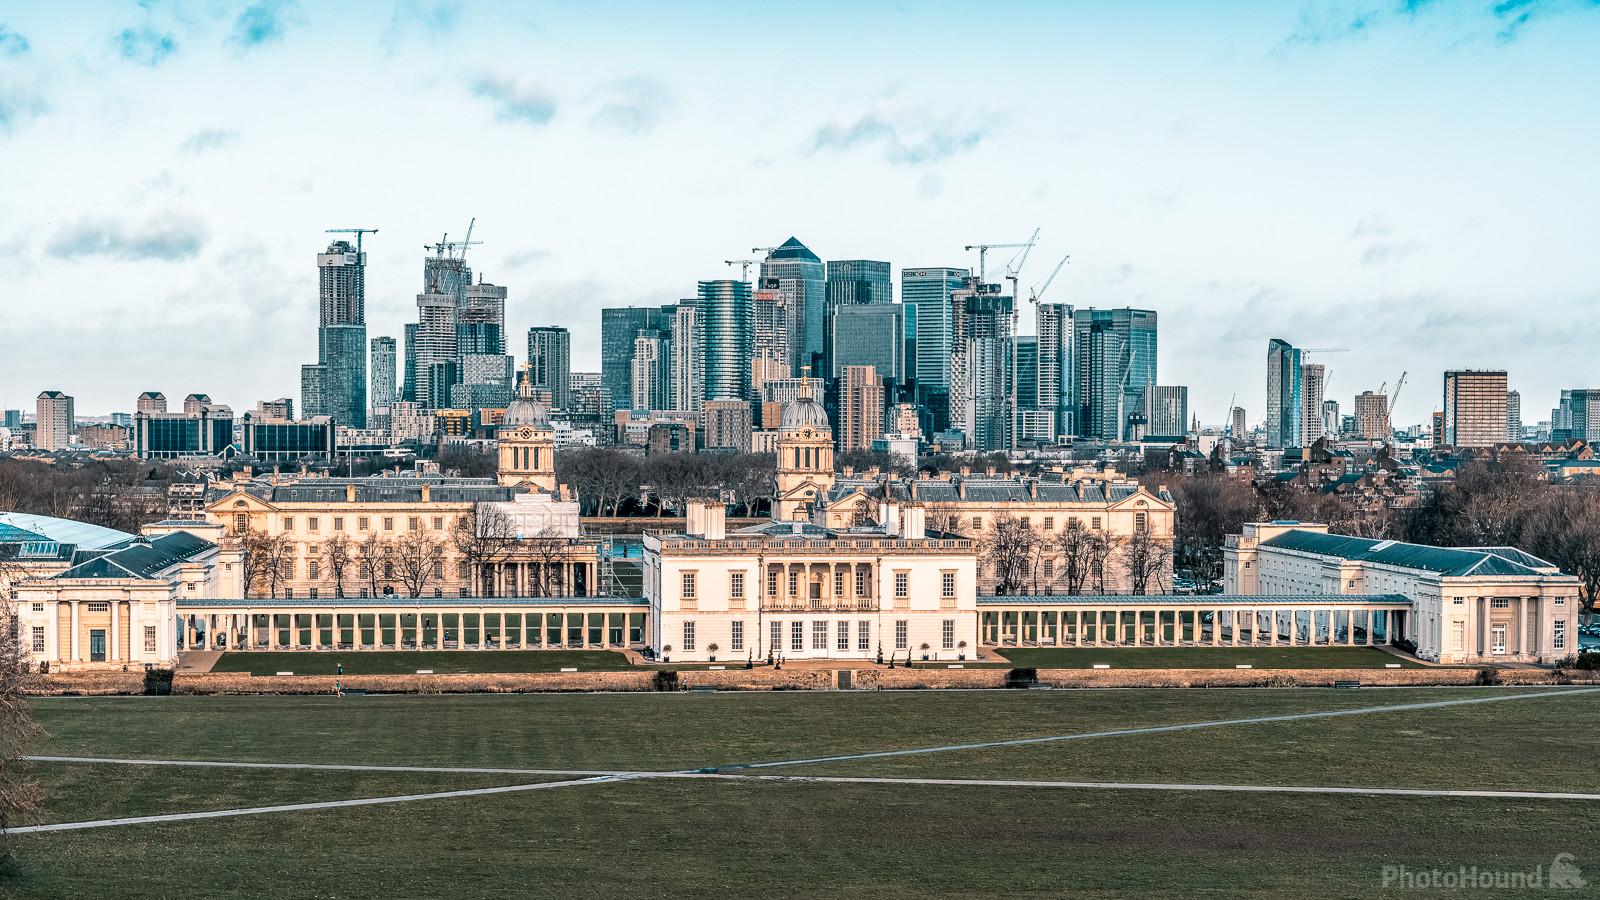 Image of Greenwich Park and Royal Observatory Lookout by James Billings.